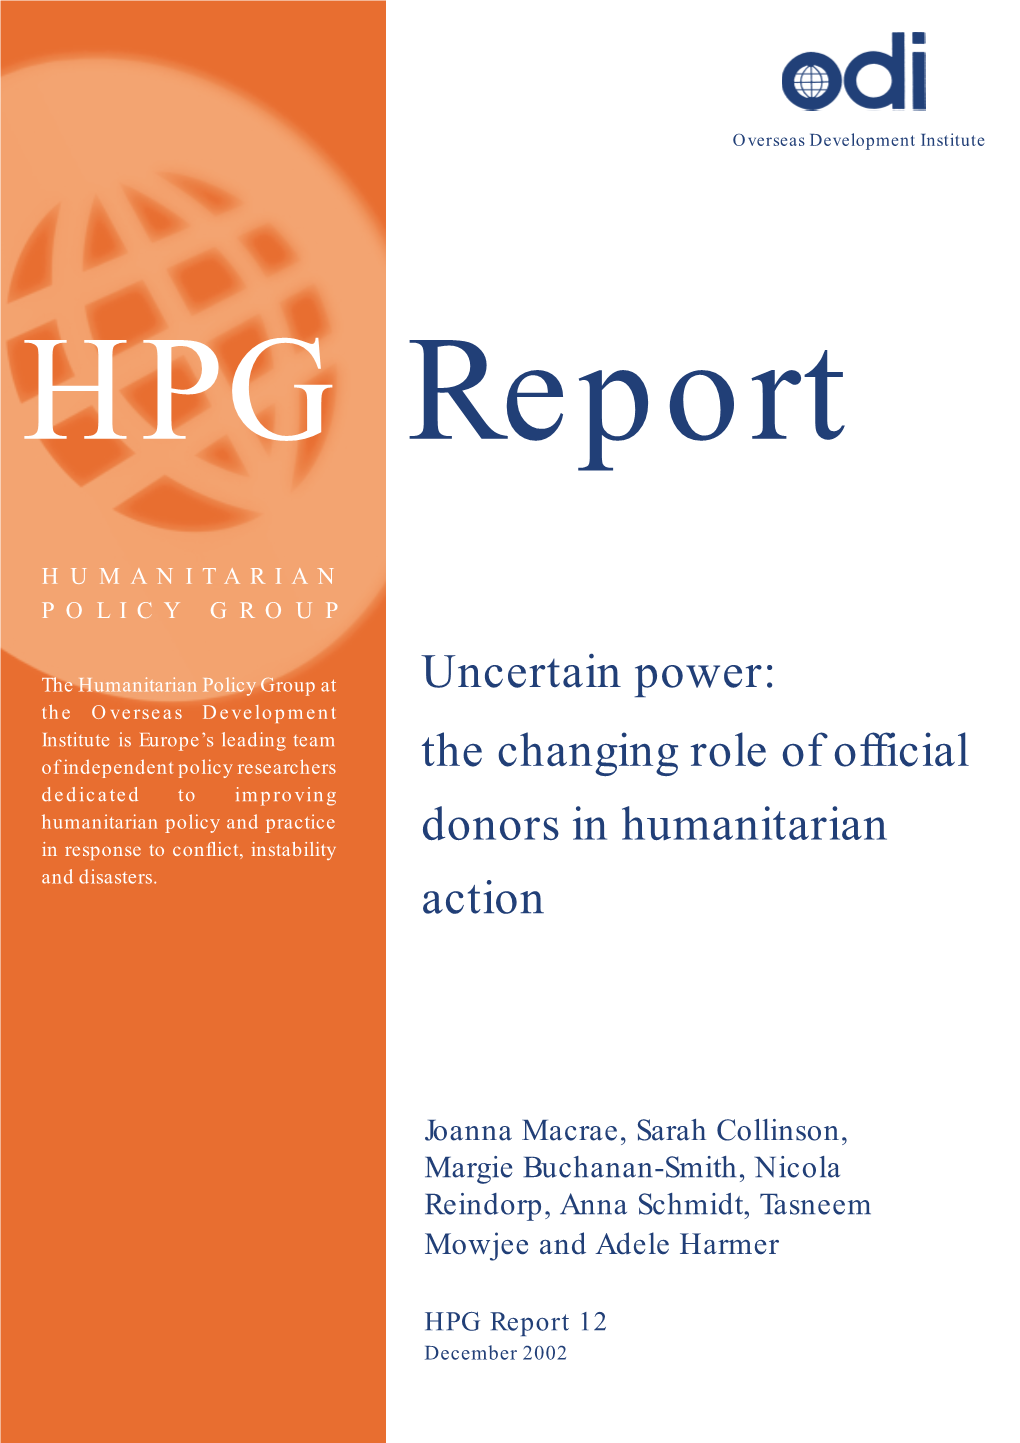 The Changing Role of Official Donors in Humanitarian Action